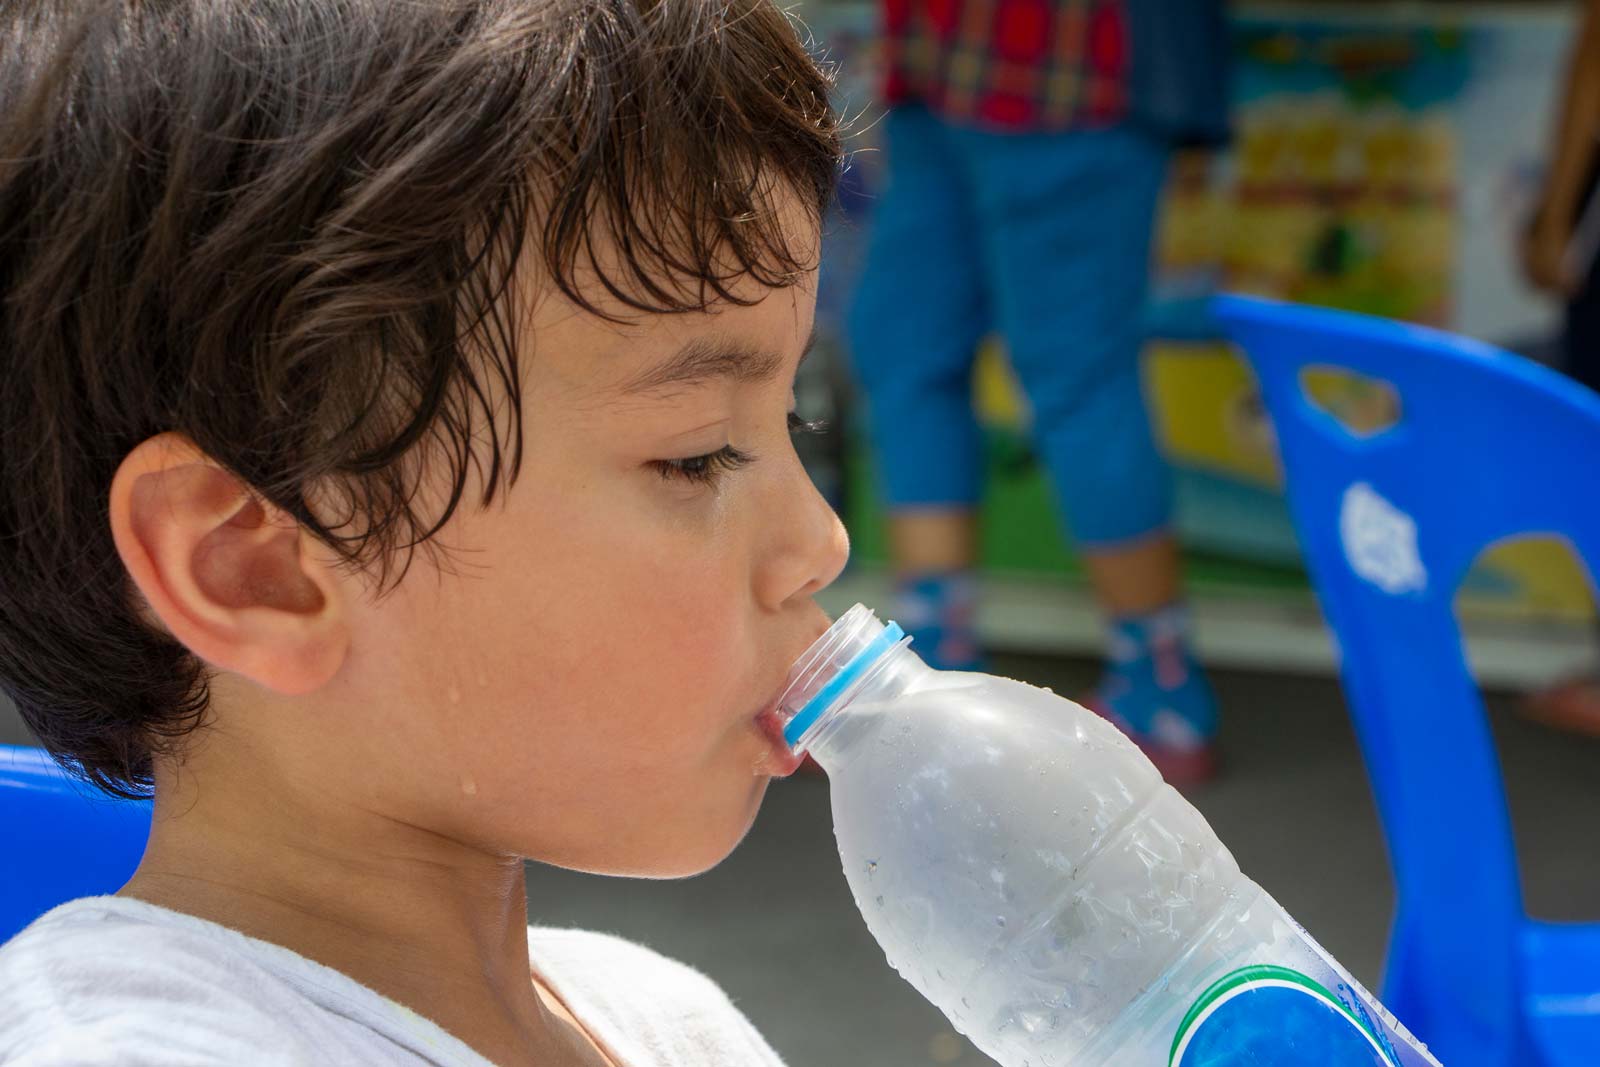 Recognizing and Preventing Dehydration in Children